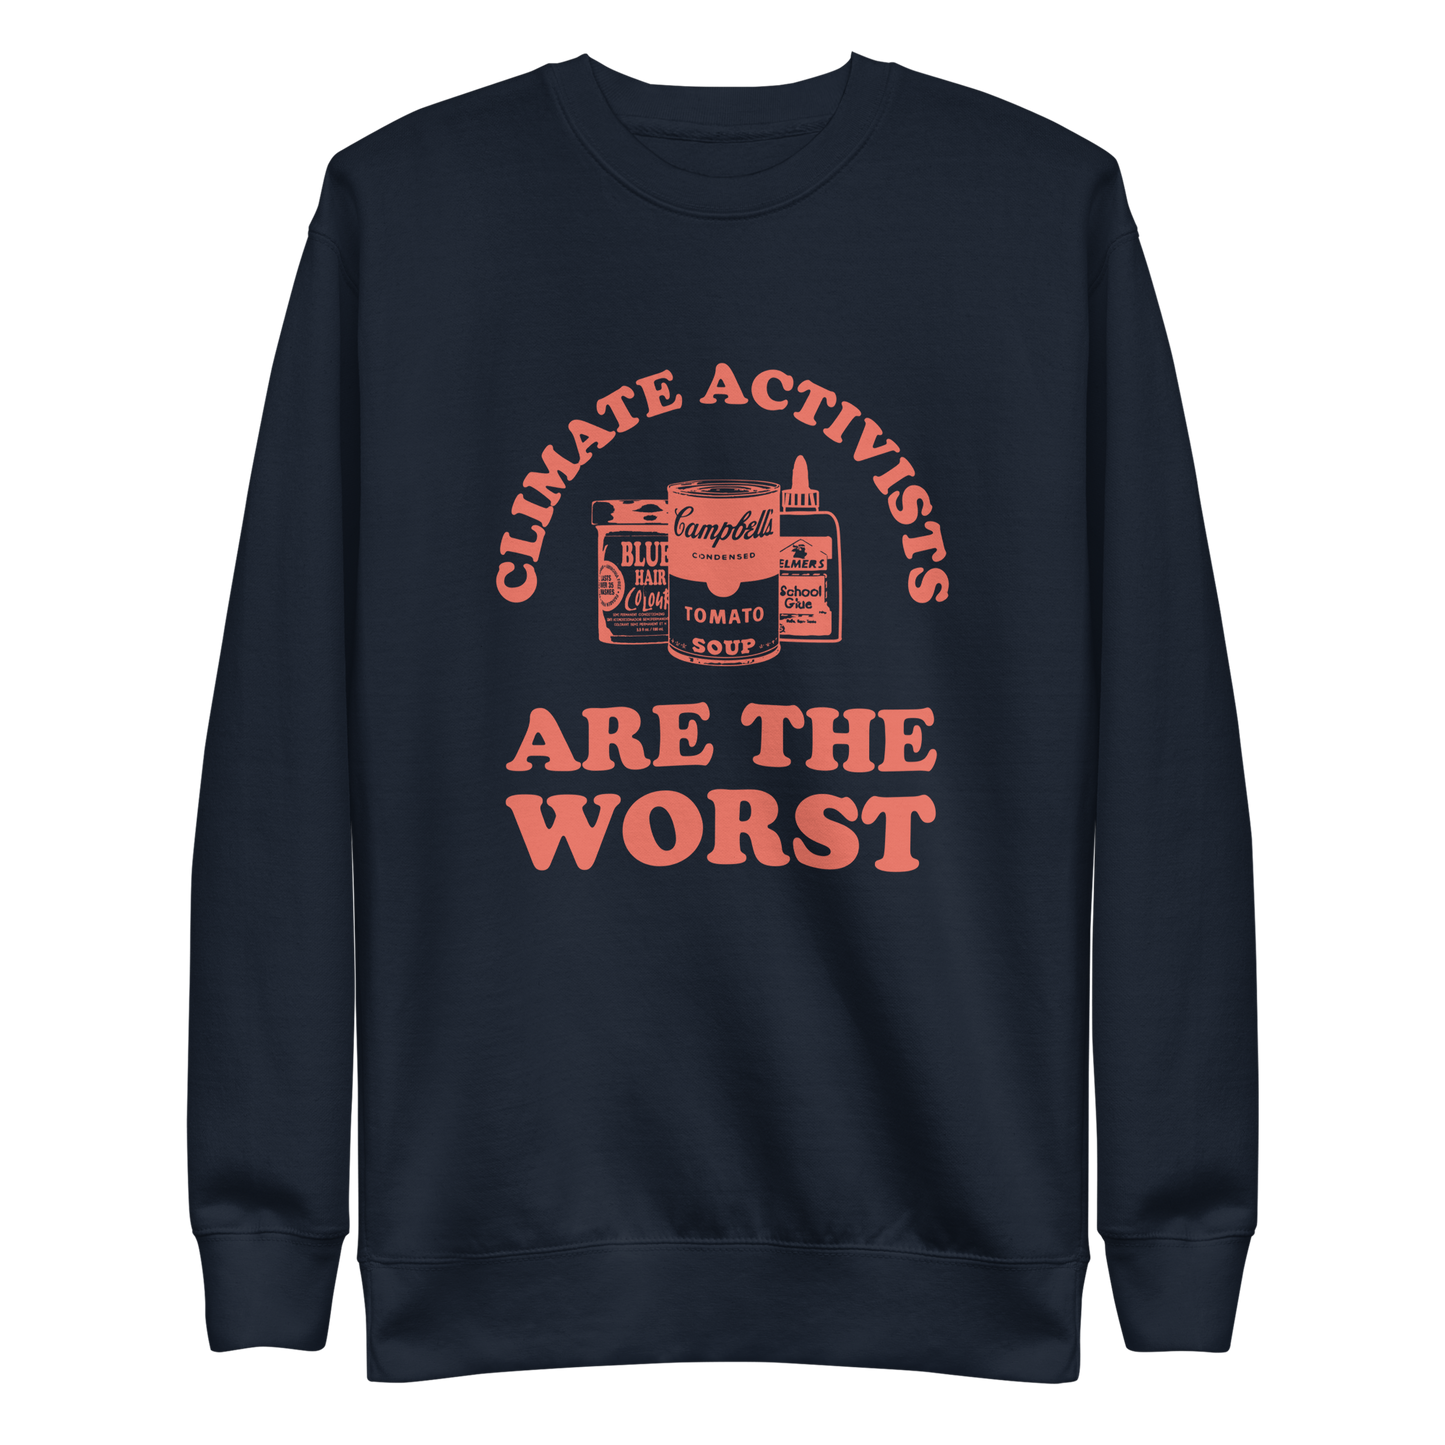 Climate Activists Are The Worst Sweatshirt